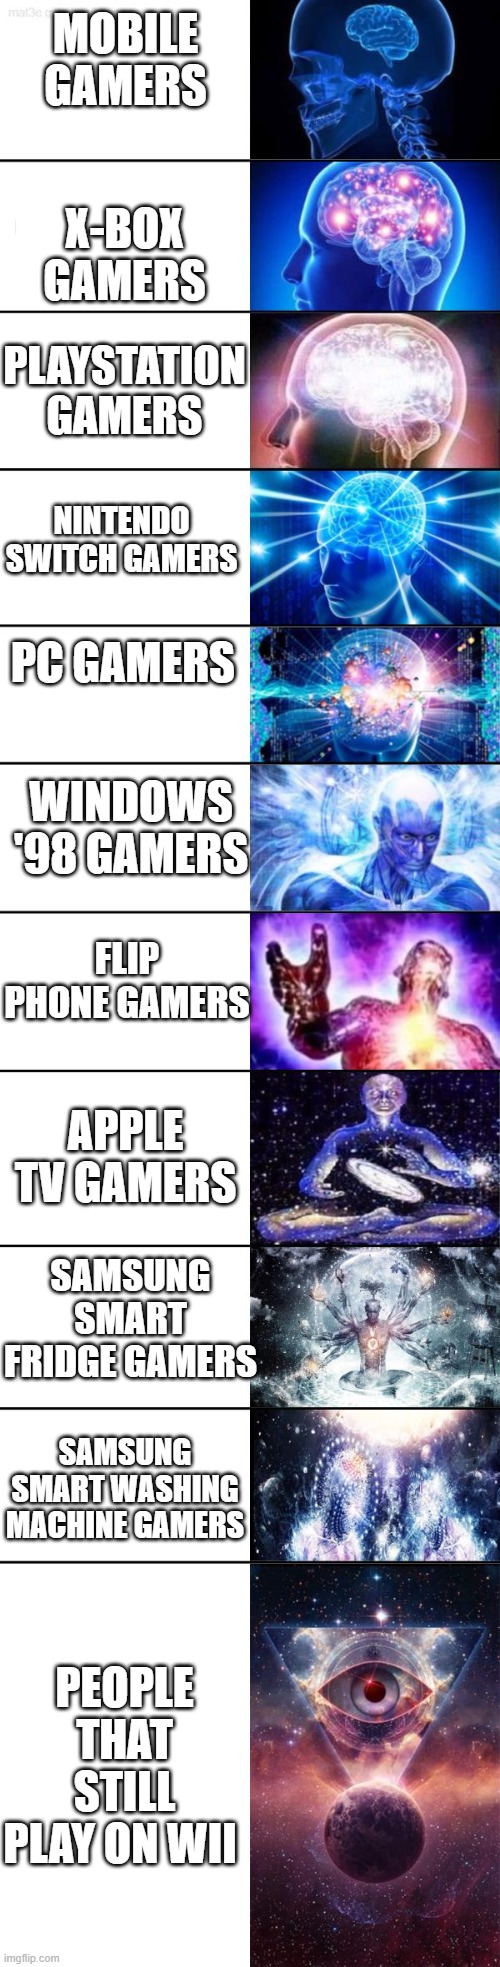 Thats pretty gamer |  MOBILE GAMERS; X-BOX GAMERS; PLAYSTATION GAMERS; NINTENDO SWITCH GAMERS; PC GAMERS; WINDOWS '98 GAMERS; FLIP PHONE GAMERS; APPLE TV GAMERS; SAMSUNG SMART FRIDGE GAMERS; SAMSUNG SMART WASHING MACHINE GAMERS; PEOPLE THAT STILL PLAY ON WII | image tagged in video games,wii,playstation,samsung,funny,expanding brain | made w/ Imgflip meme maker